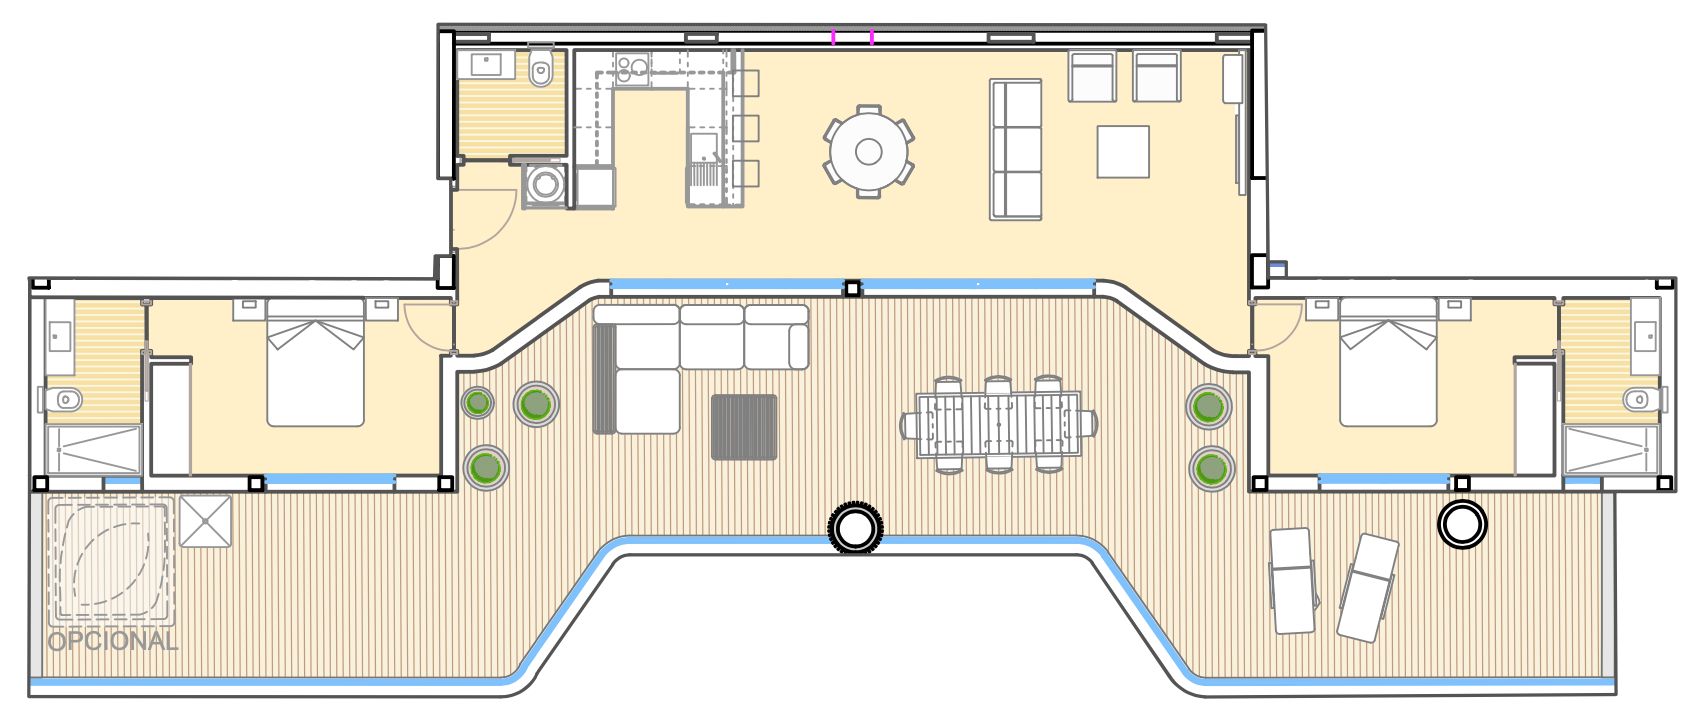 Floor plan for Apartment ref 3117 for sale in Isea Calma Spain - Quality Homes Costa Cálida